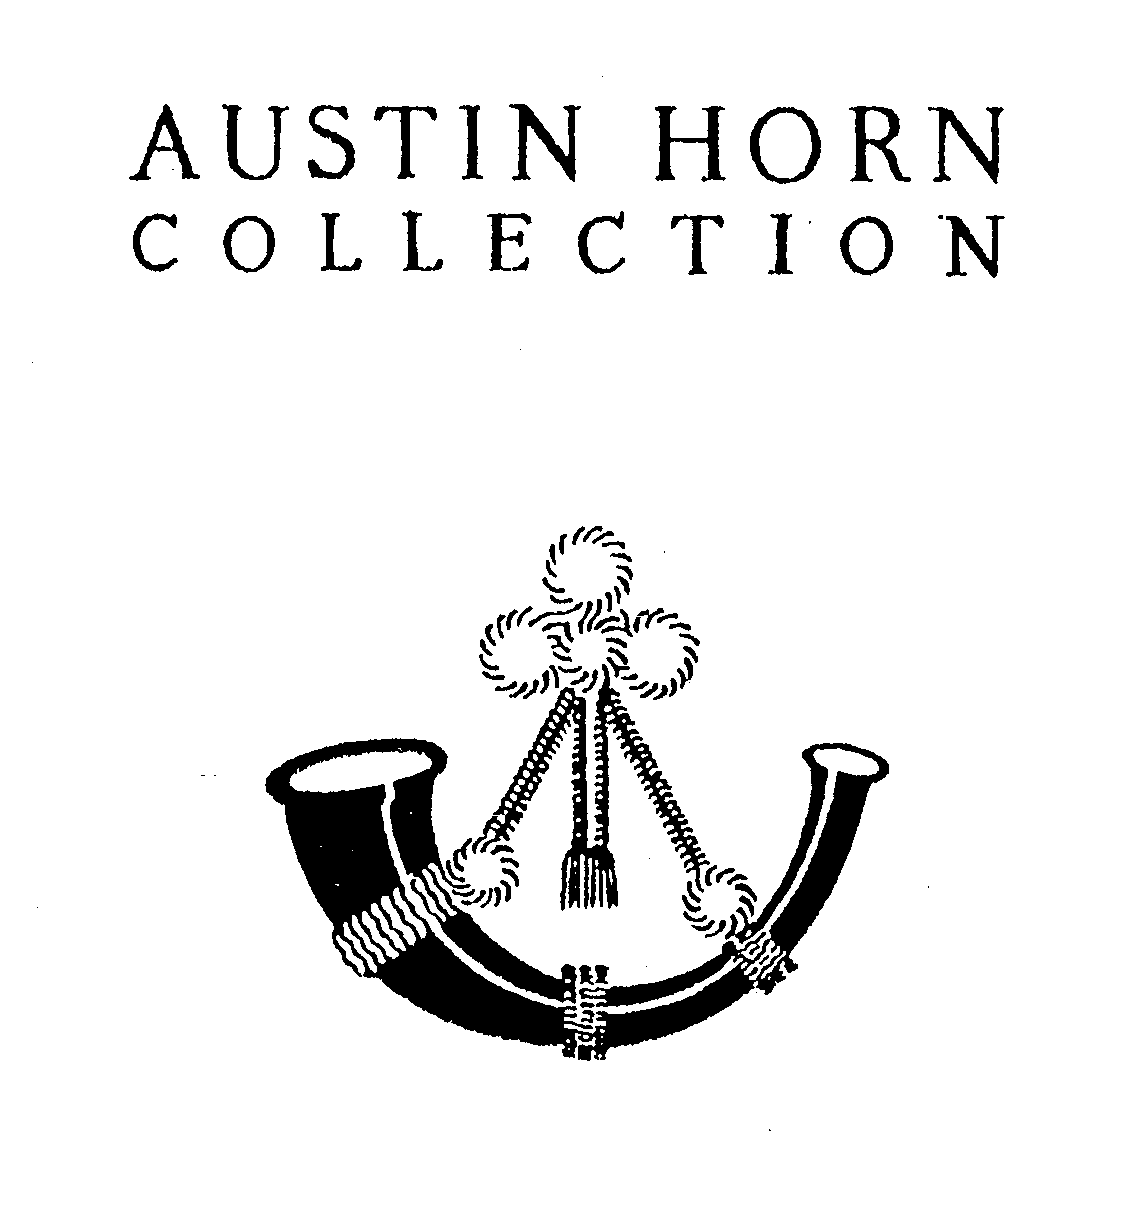  AUSTIN HORN COLLECTION